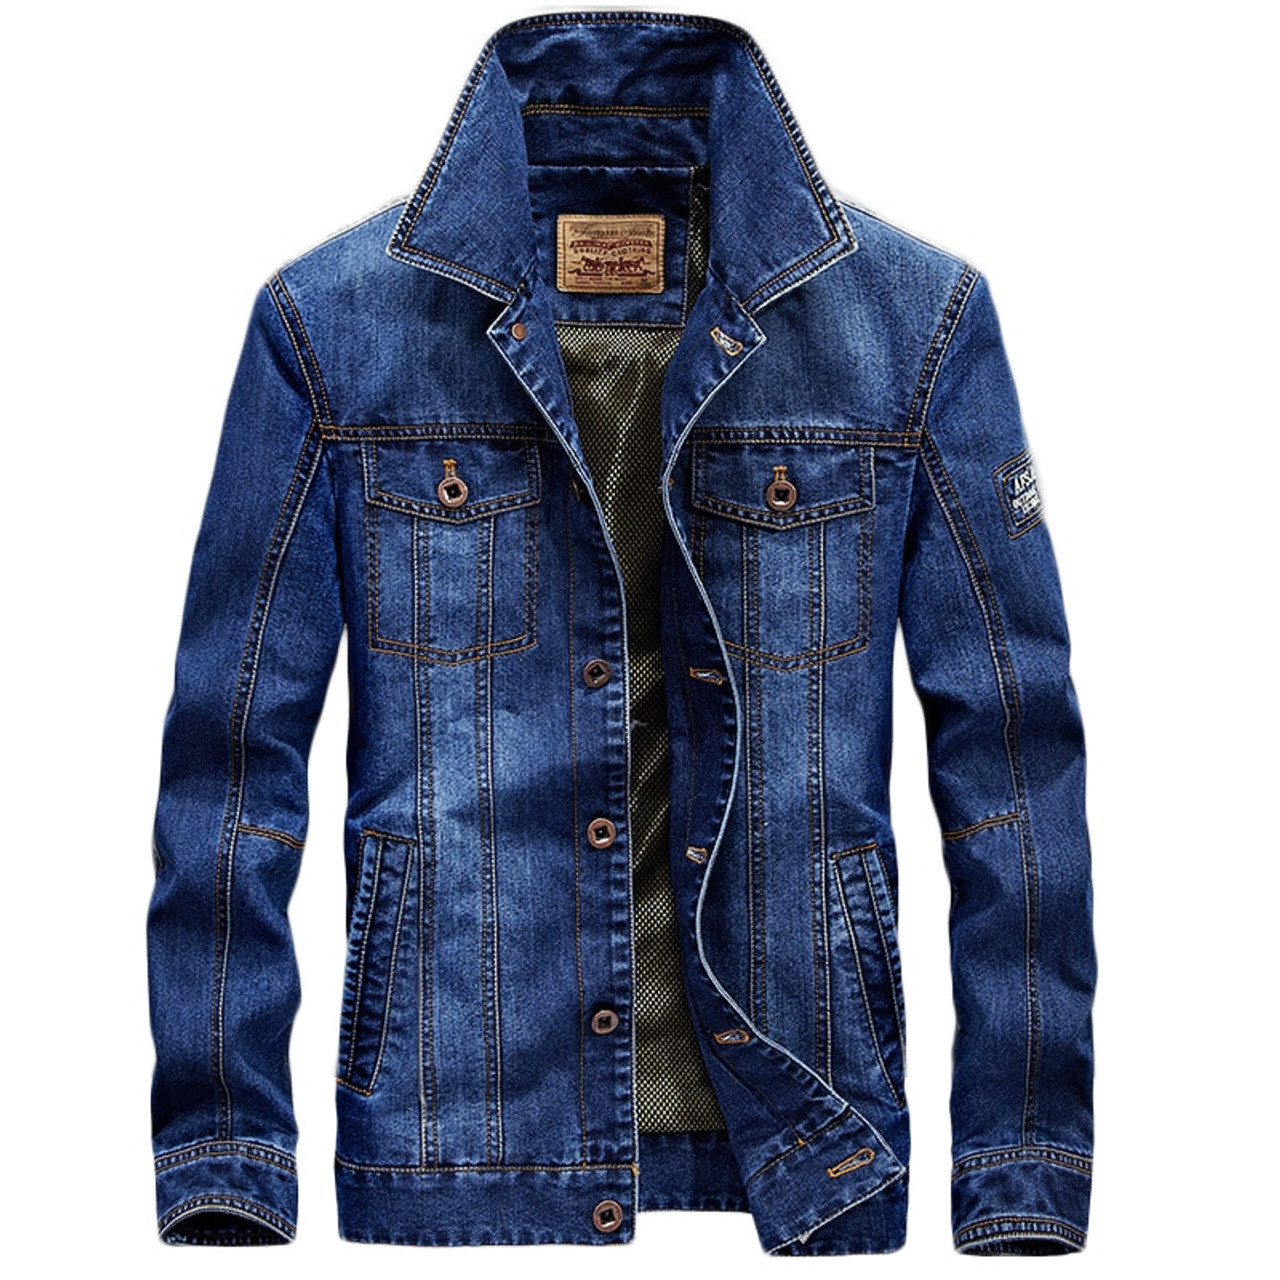 Jacket For Men Casual Jackets Denim Jeans - Buy Jacket For Men Casual  Jackets Denim Jeans online in India